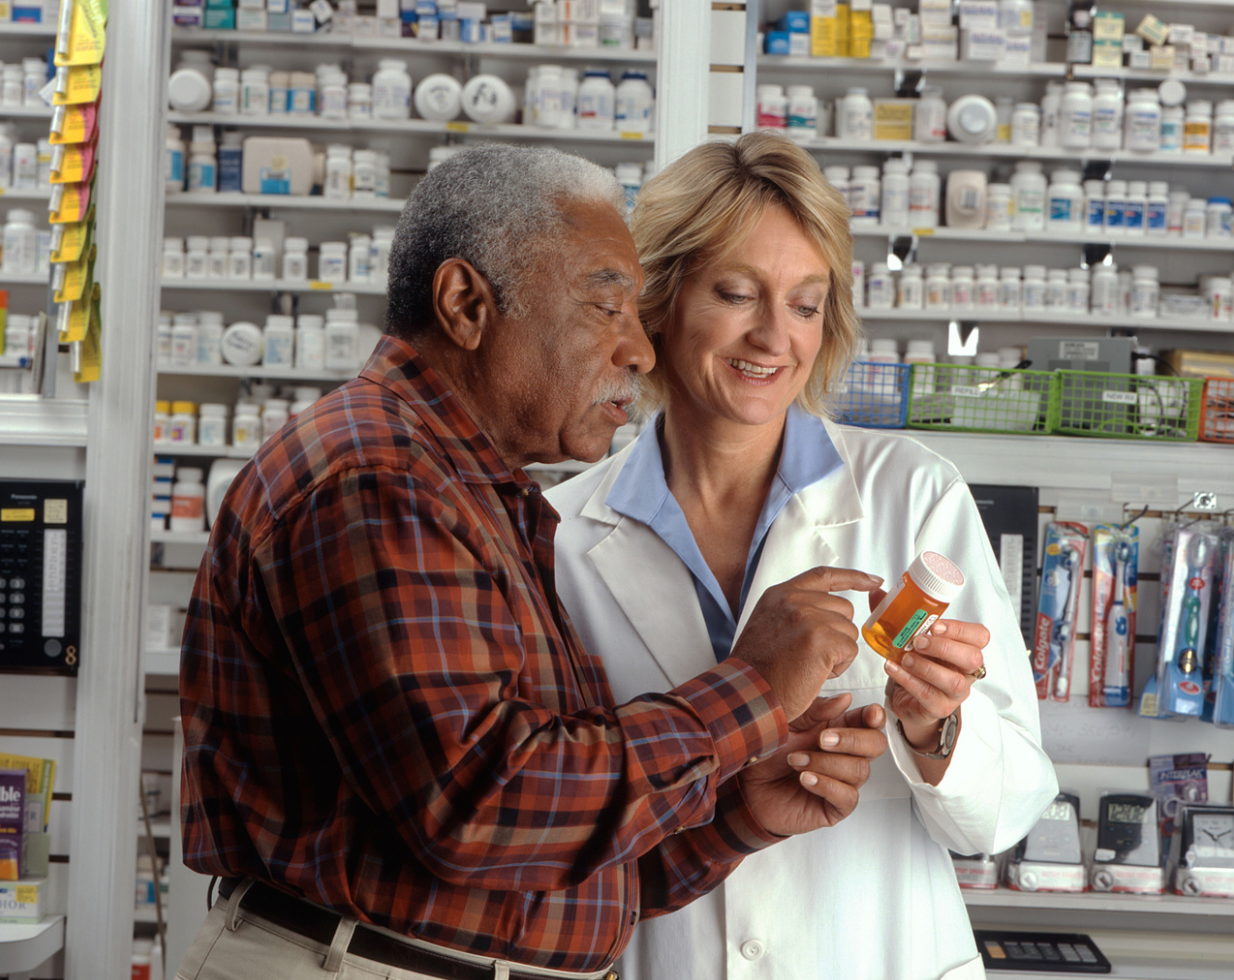 Pharmacists Play Key Role in Helping Patients Choose Antipyretics